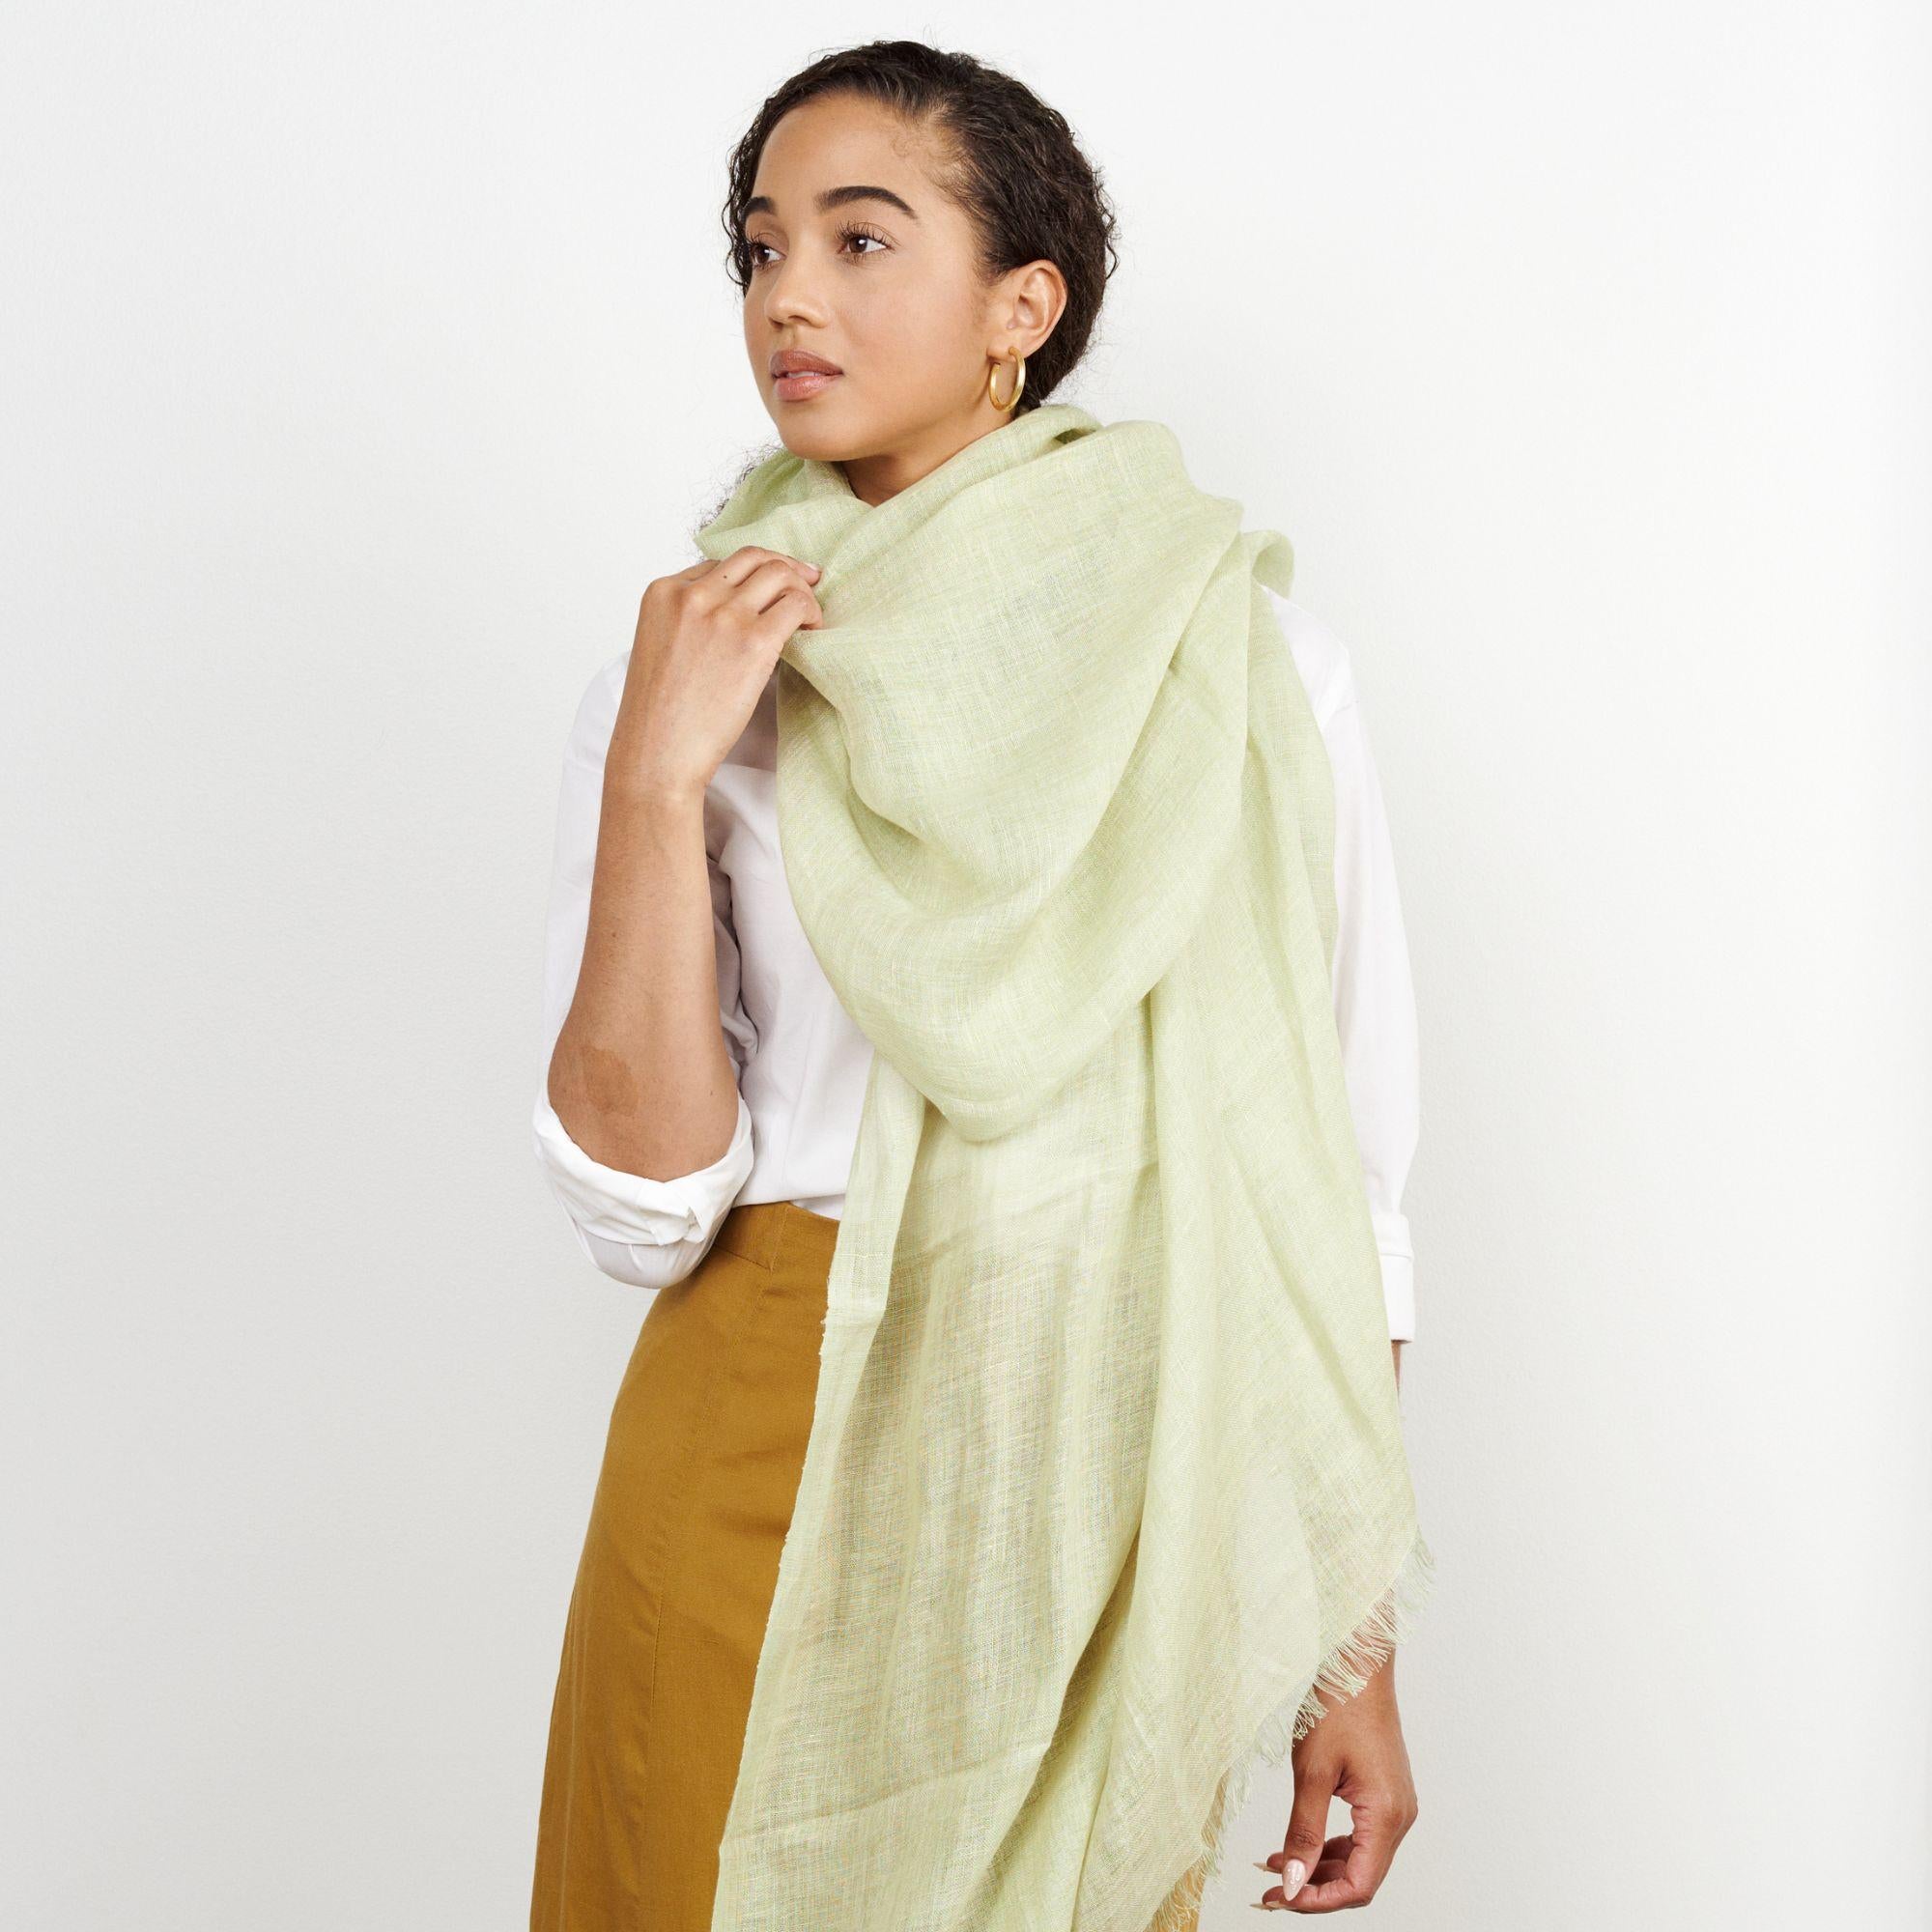 Soya is a solid timeless scarf that is a truly  sustainable luxury statement piece and also supports artisan communities ethically. A classic unisex piece , it  can be worn all year around. Plant based pure linen makes this scarf naturally